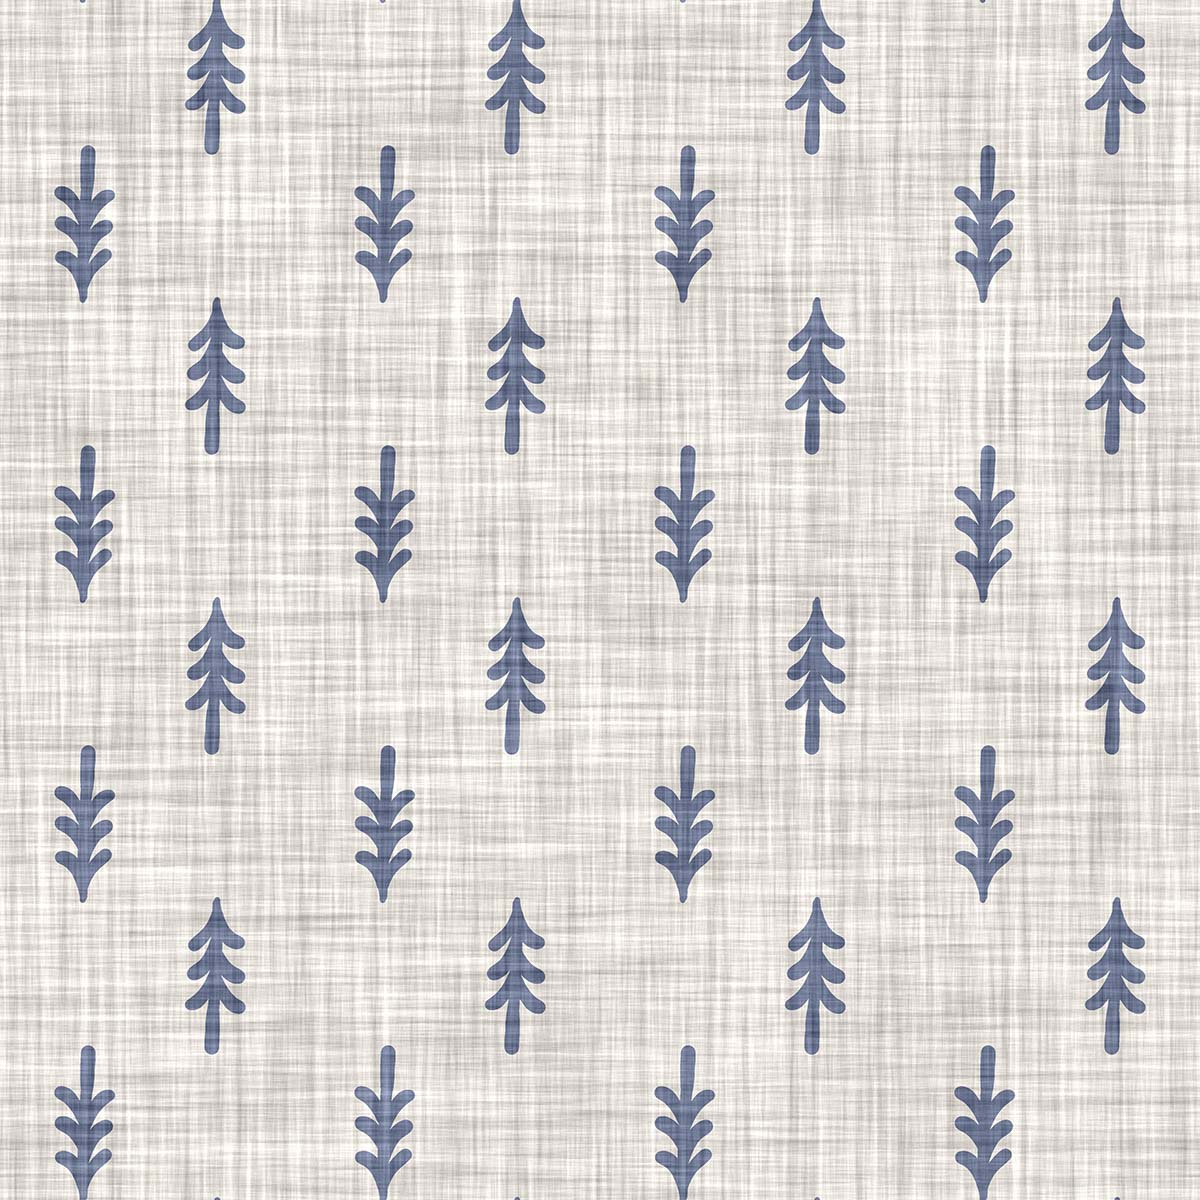 A fabric with blue leaves